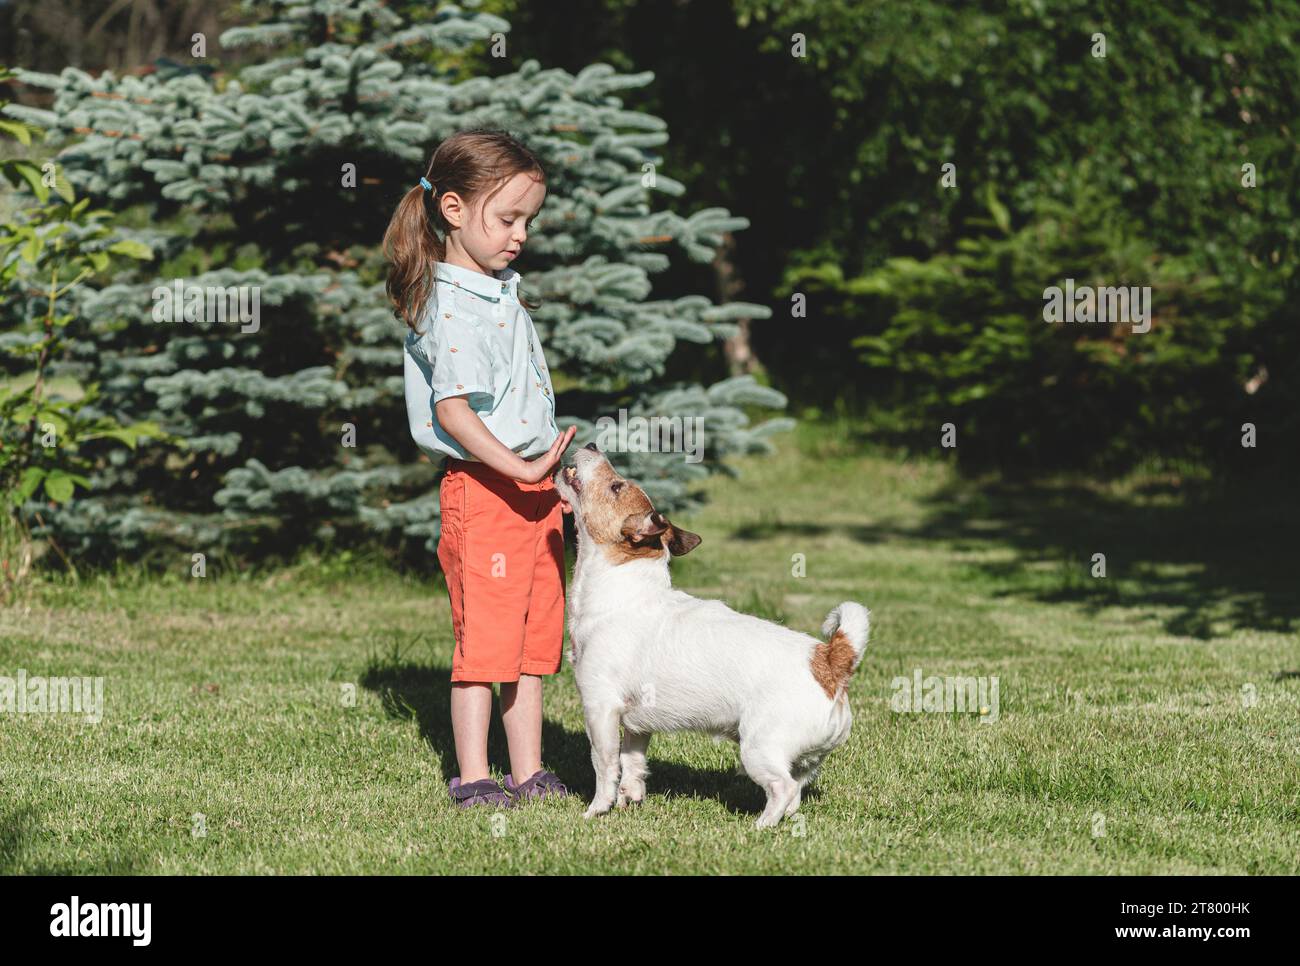 Child wants to become a dog trainer is learning how to train a dog Stock Photo